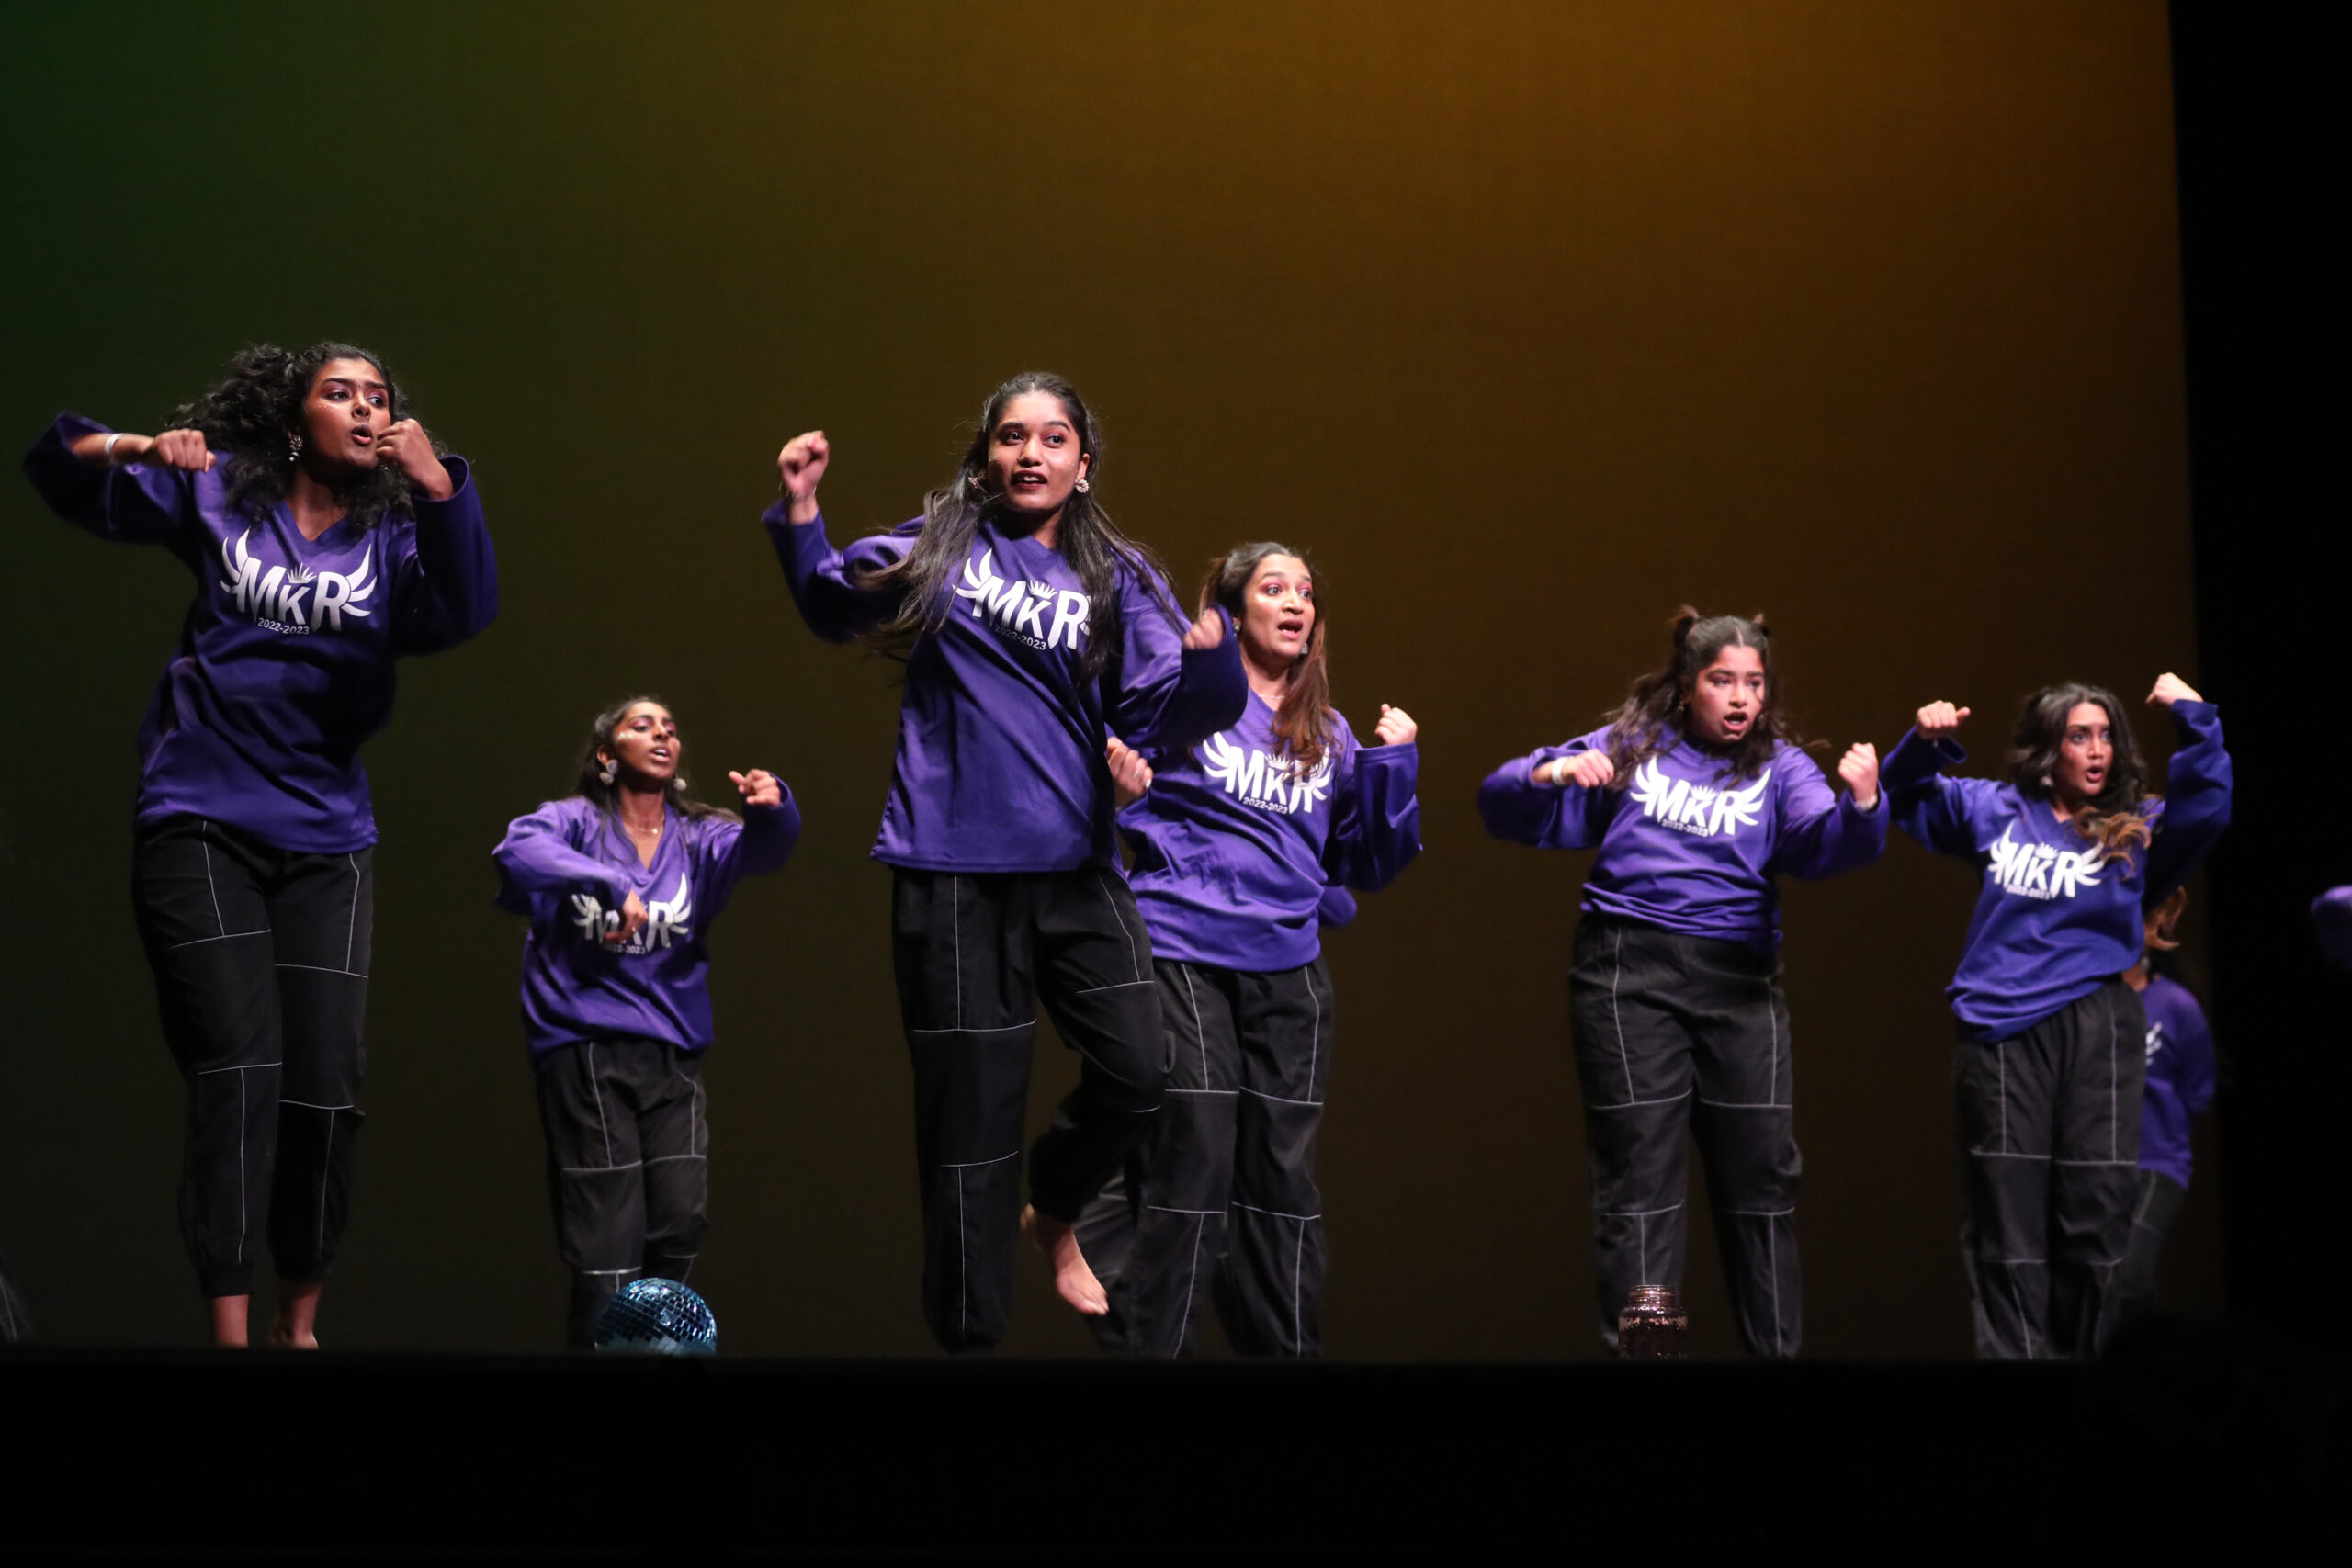 6 girl students wearing similar costumes and perfroming dance.